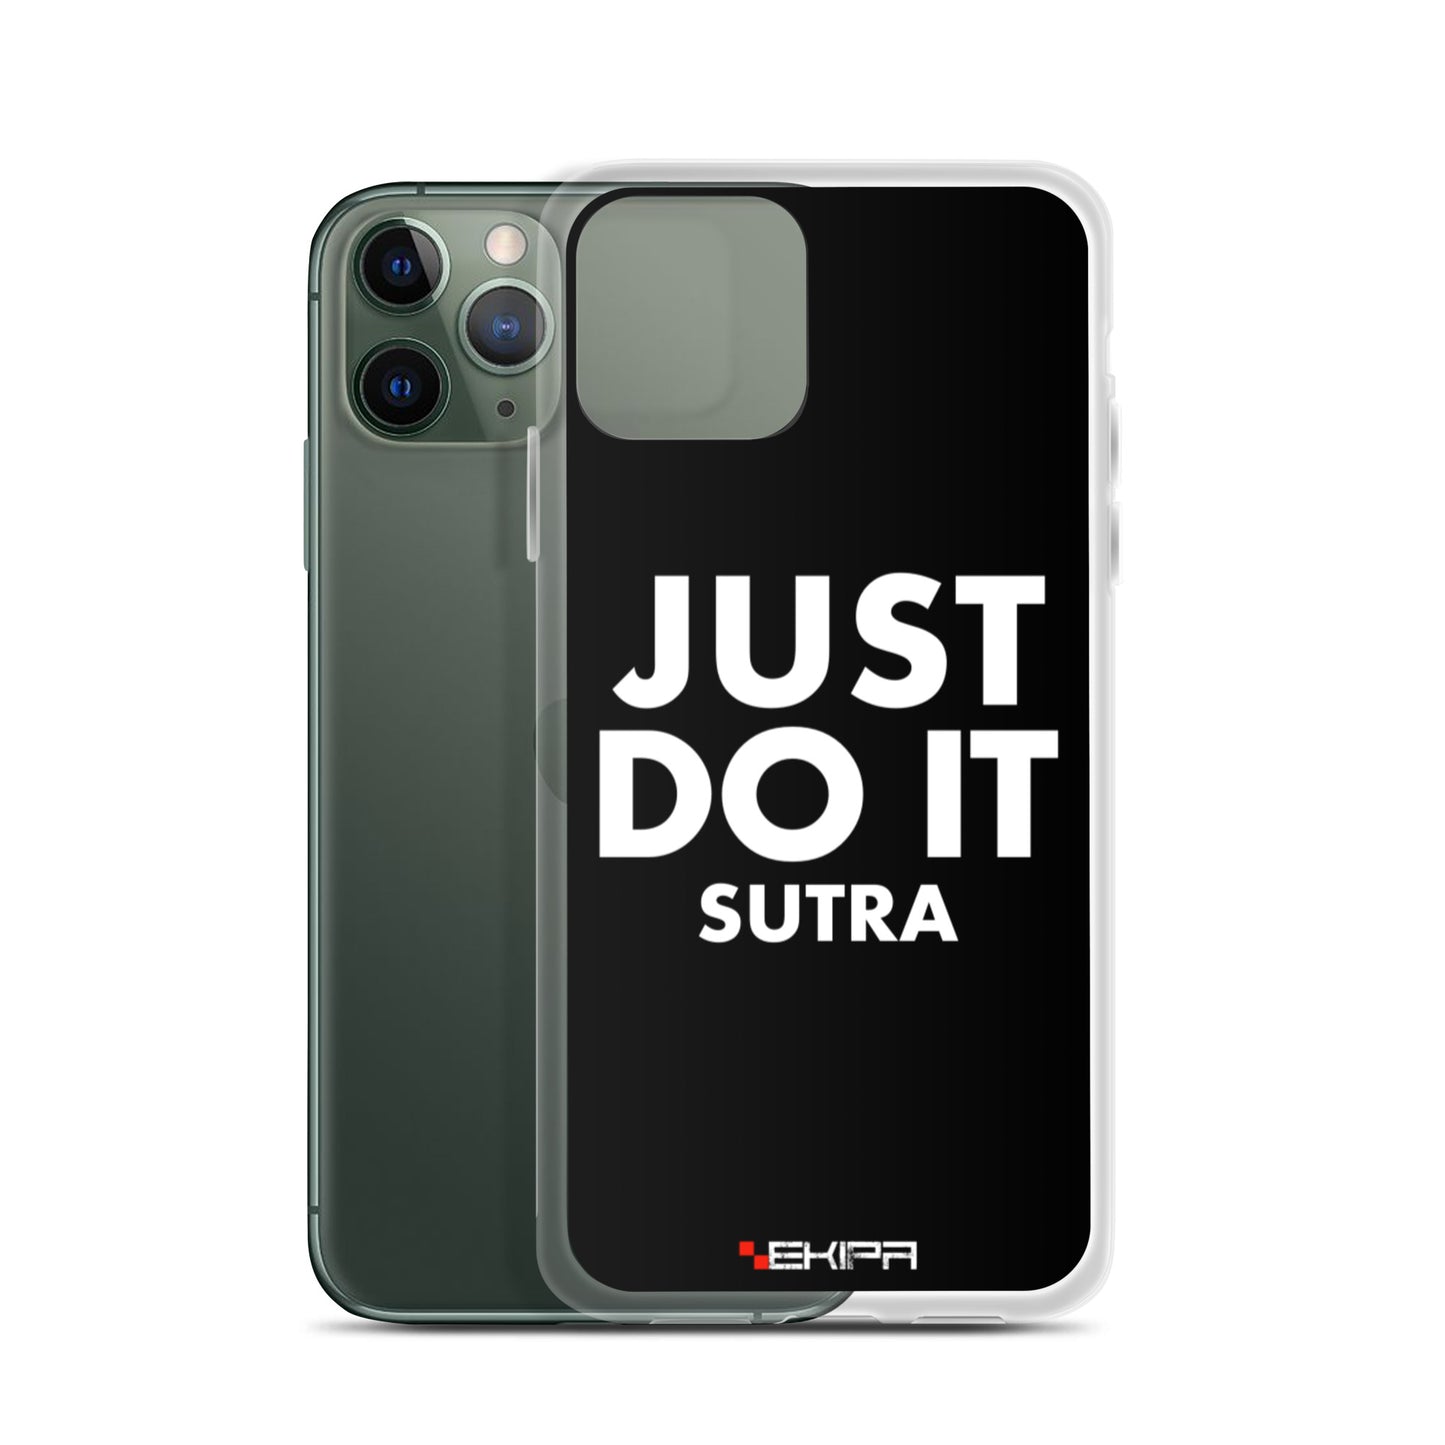 "Just do it sutra" - iPhone case